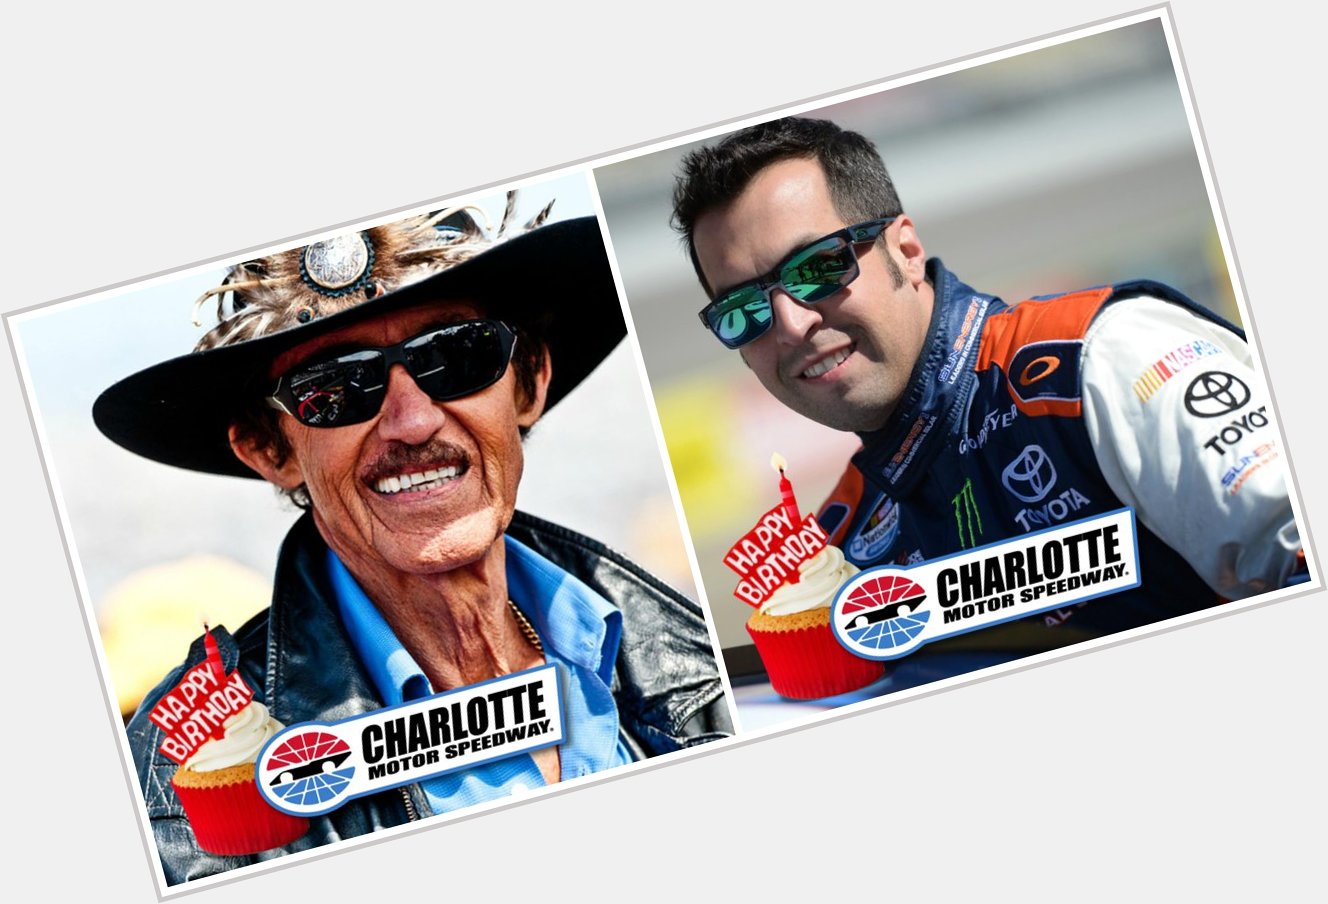 We\d like to wish a very happy birthday to Richard Petty as well as driver 